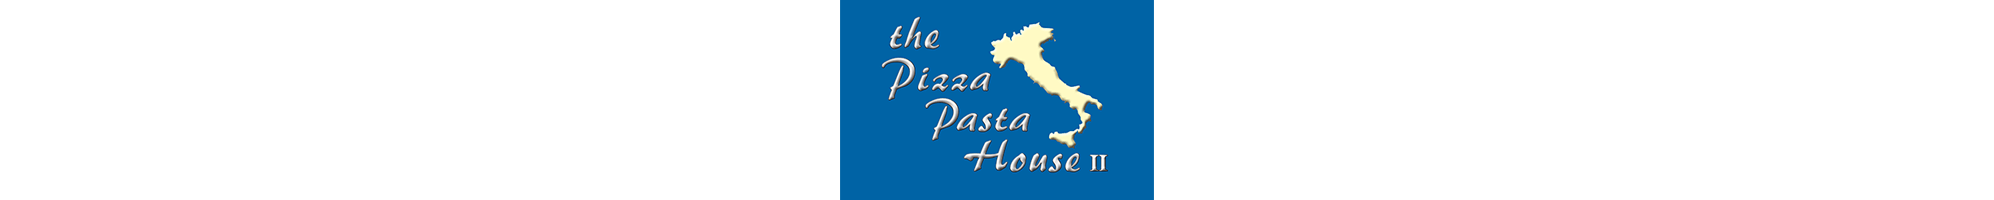 The Pizza Pasta House II